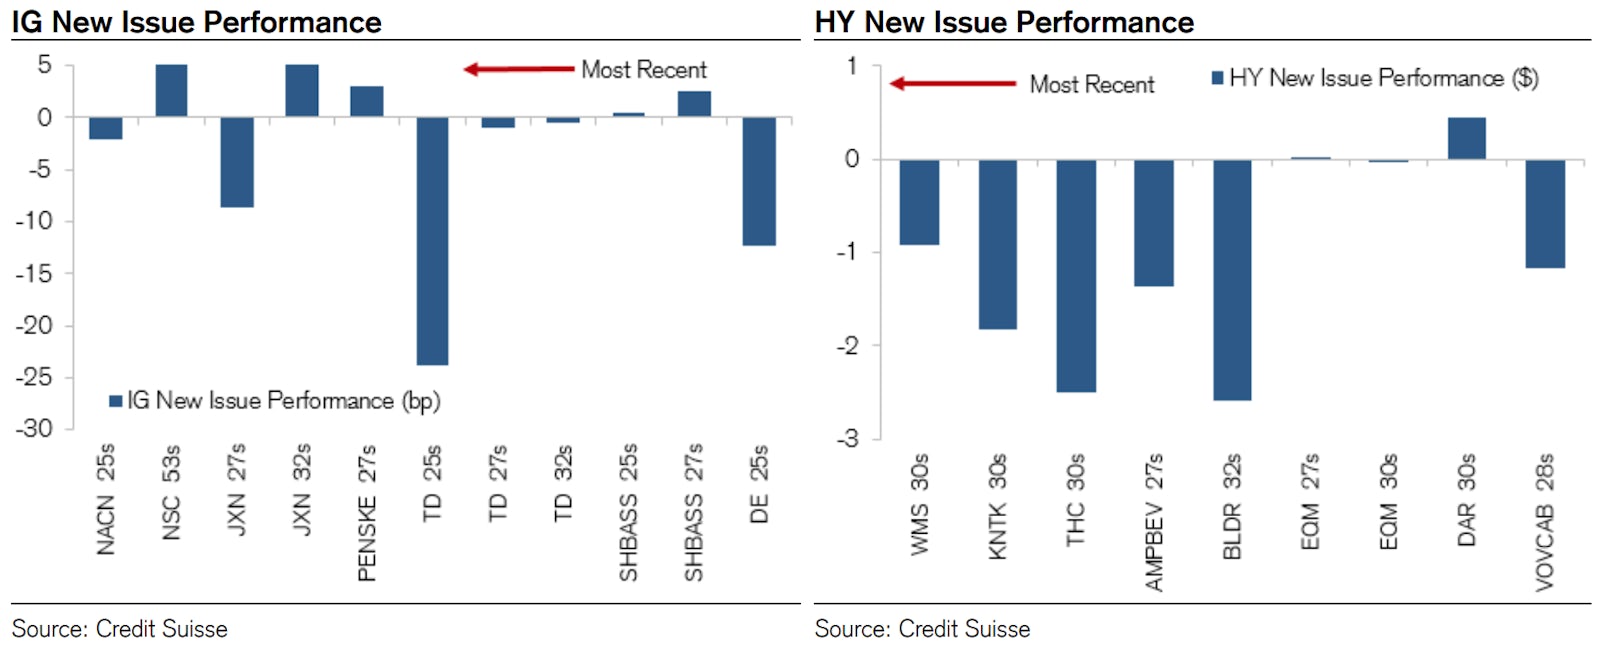 USD IG & HY New Issue Performance | Source: Credit Suisse